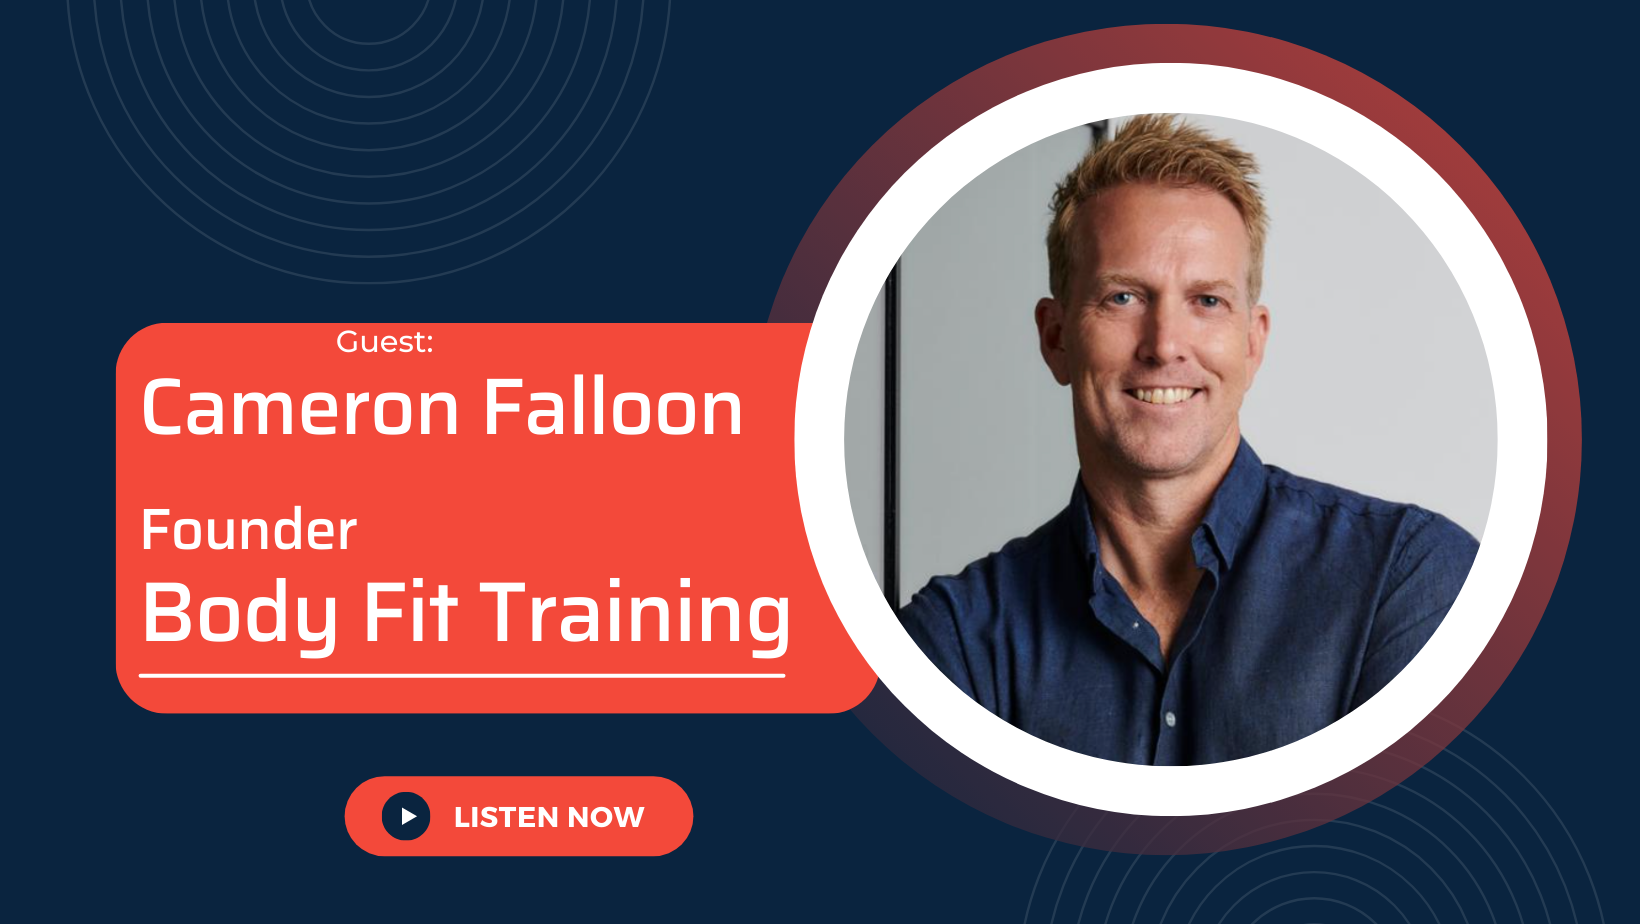 Creative & Successful Goal-Setting Tips with the Founder of Body Fit Training, Cameron Falloon